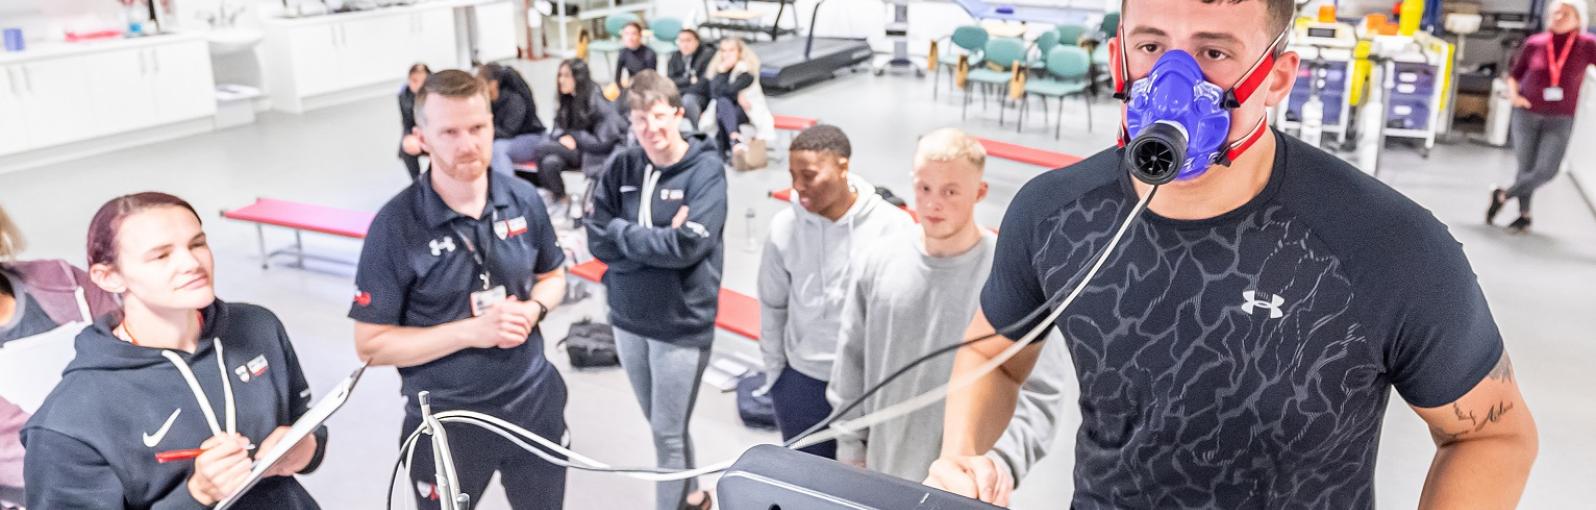 Study Nutrition Exercise Sport University of Salford